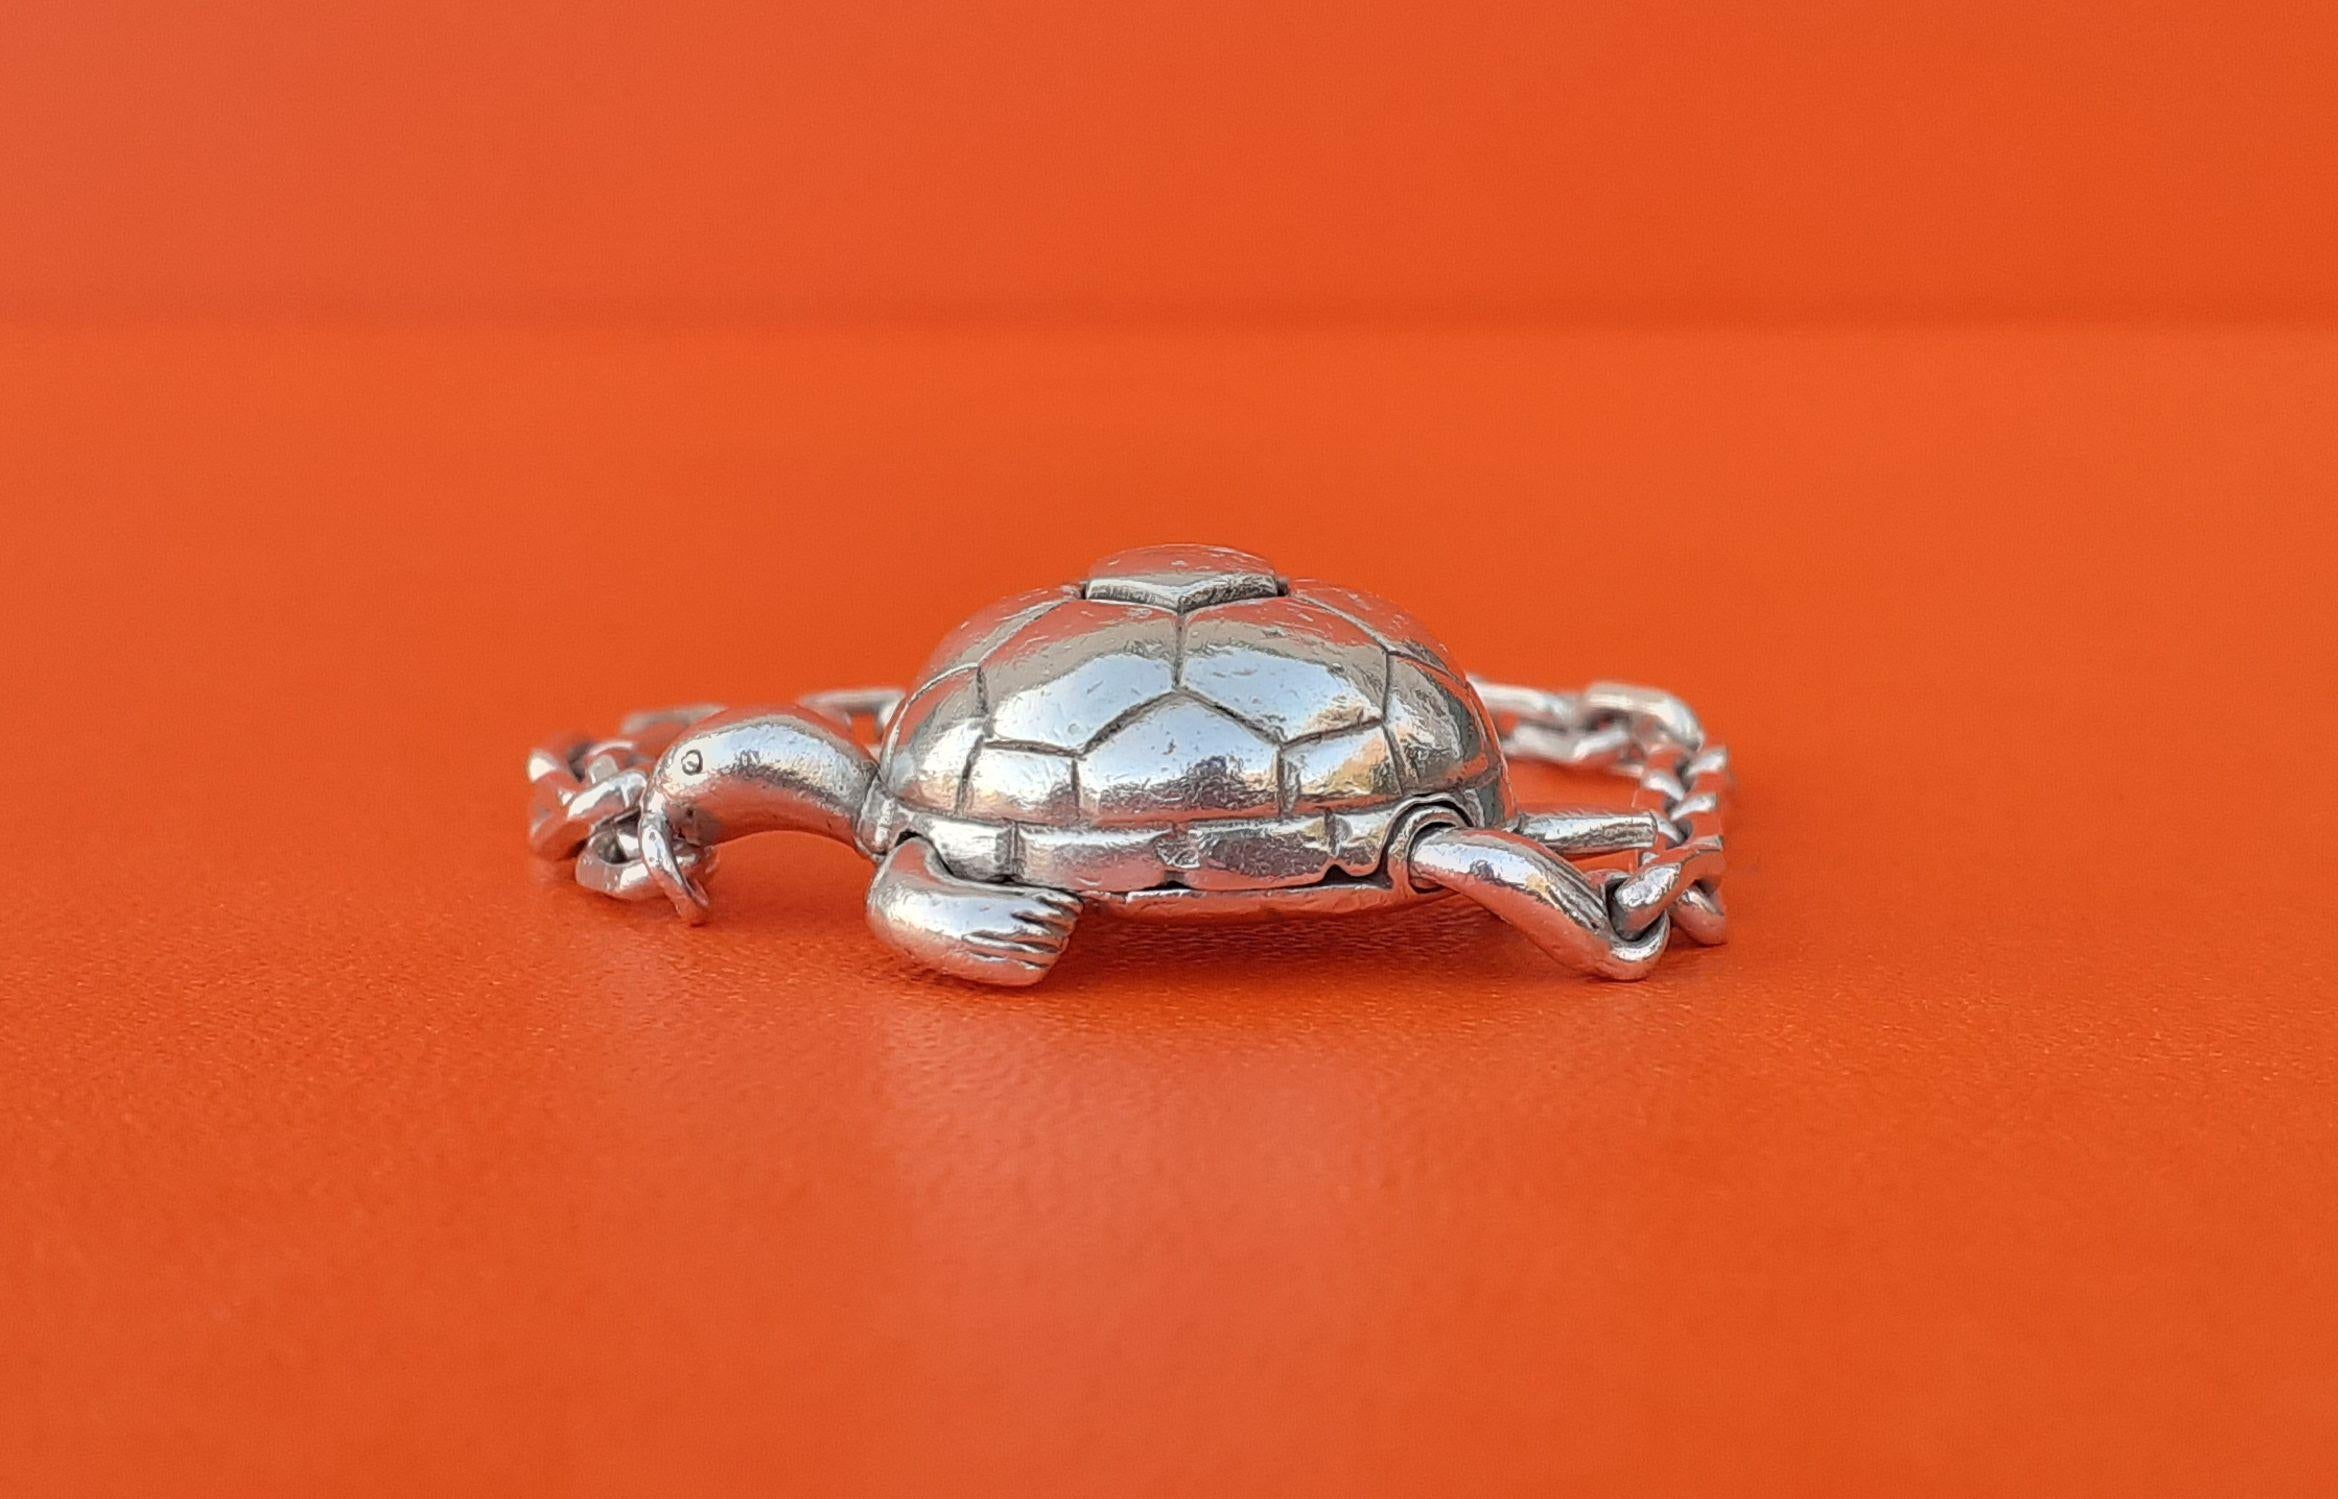 Rare Authentic Hermès Charm or Key Ring

Turtle Shaped

Can be used as Bag Charm or Key Ring

Made of Silver

Vintage Item

Colorway: Silver-tone

Secret mechanism: you have to press on the back of the turtle and pull on its left hind paw at the